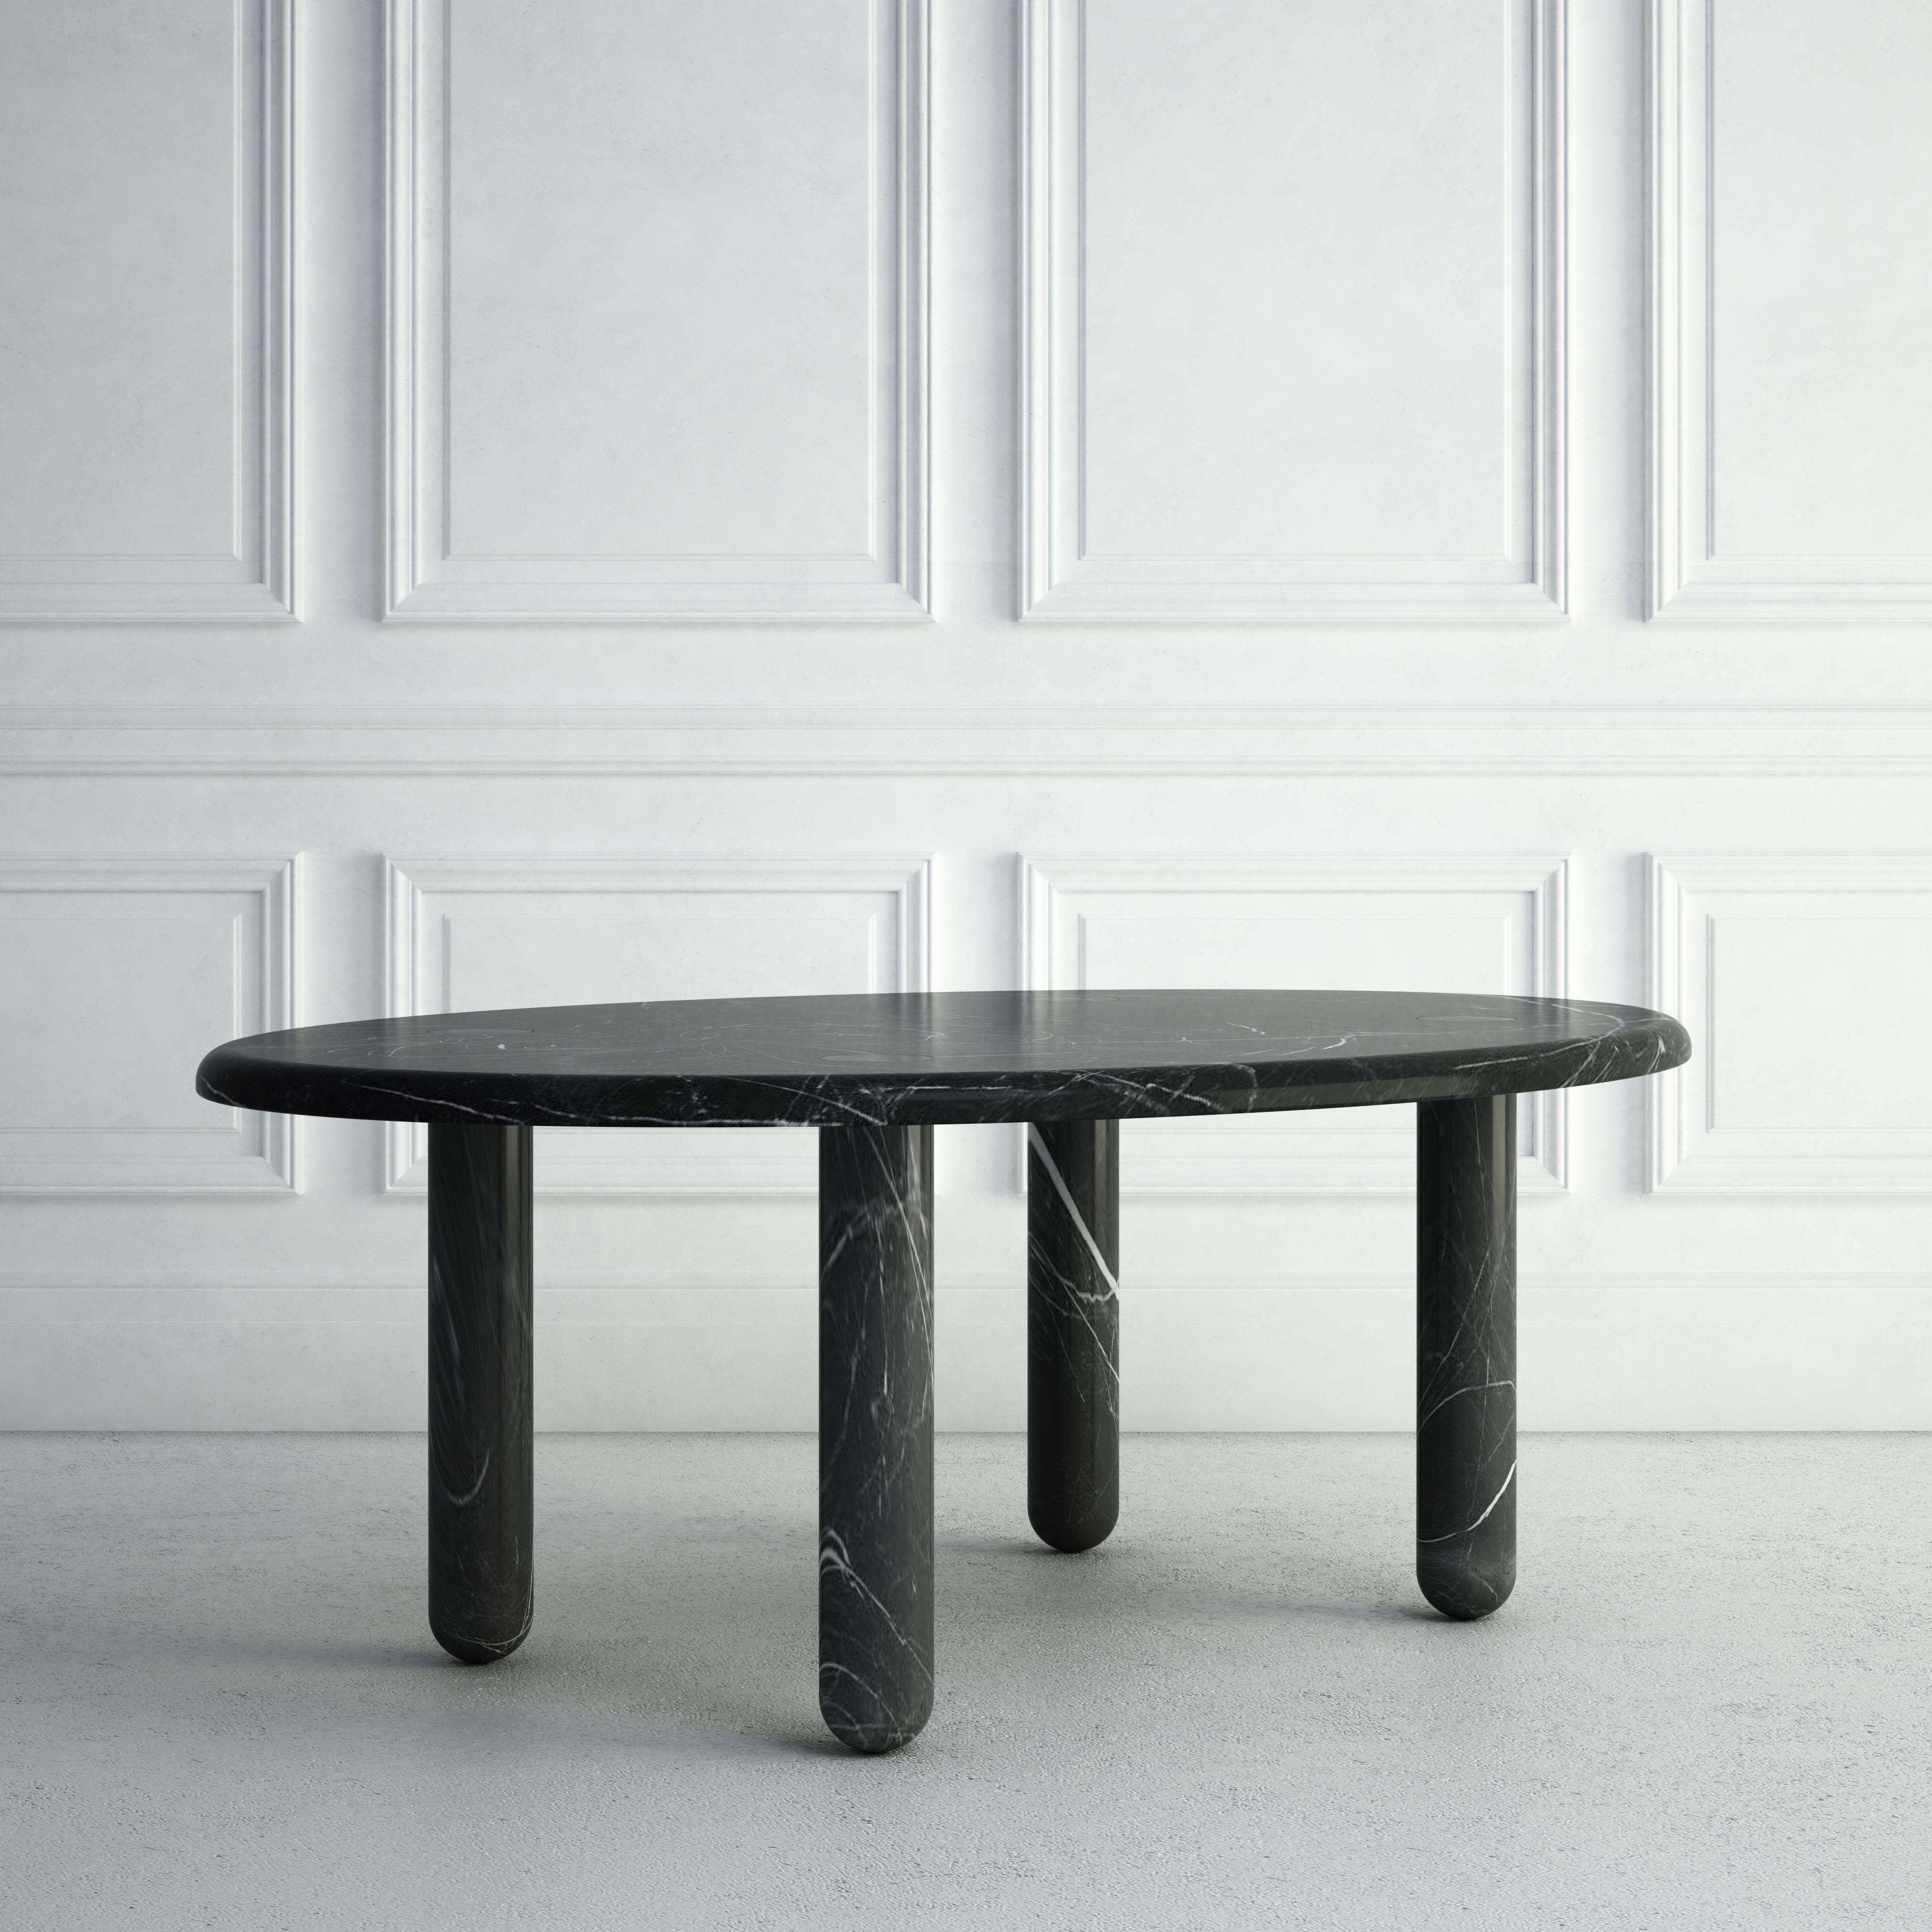 The Delphine is a graceful modern dining table. The top is a carved oval-shaped stone slab, with subtle edging. Each of the four legs is carved into a thin, cylindrical shape, with the bottoms of the legs gently rounded. This gives the table a very